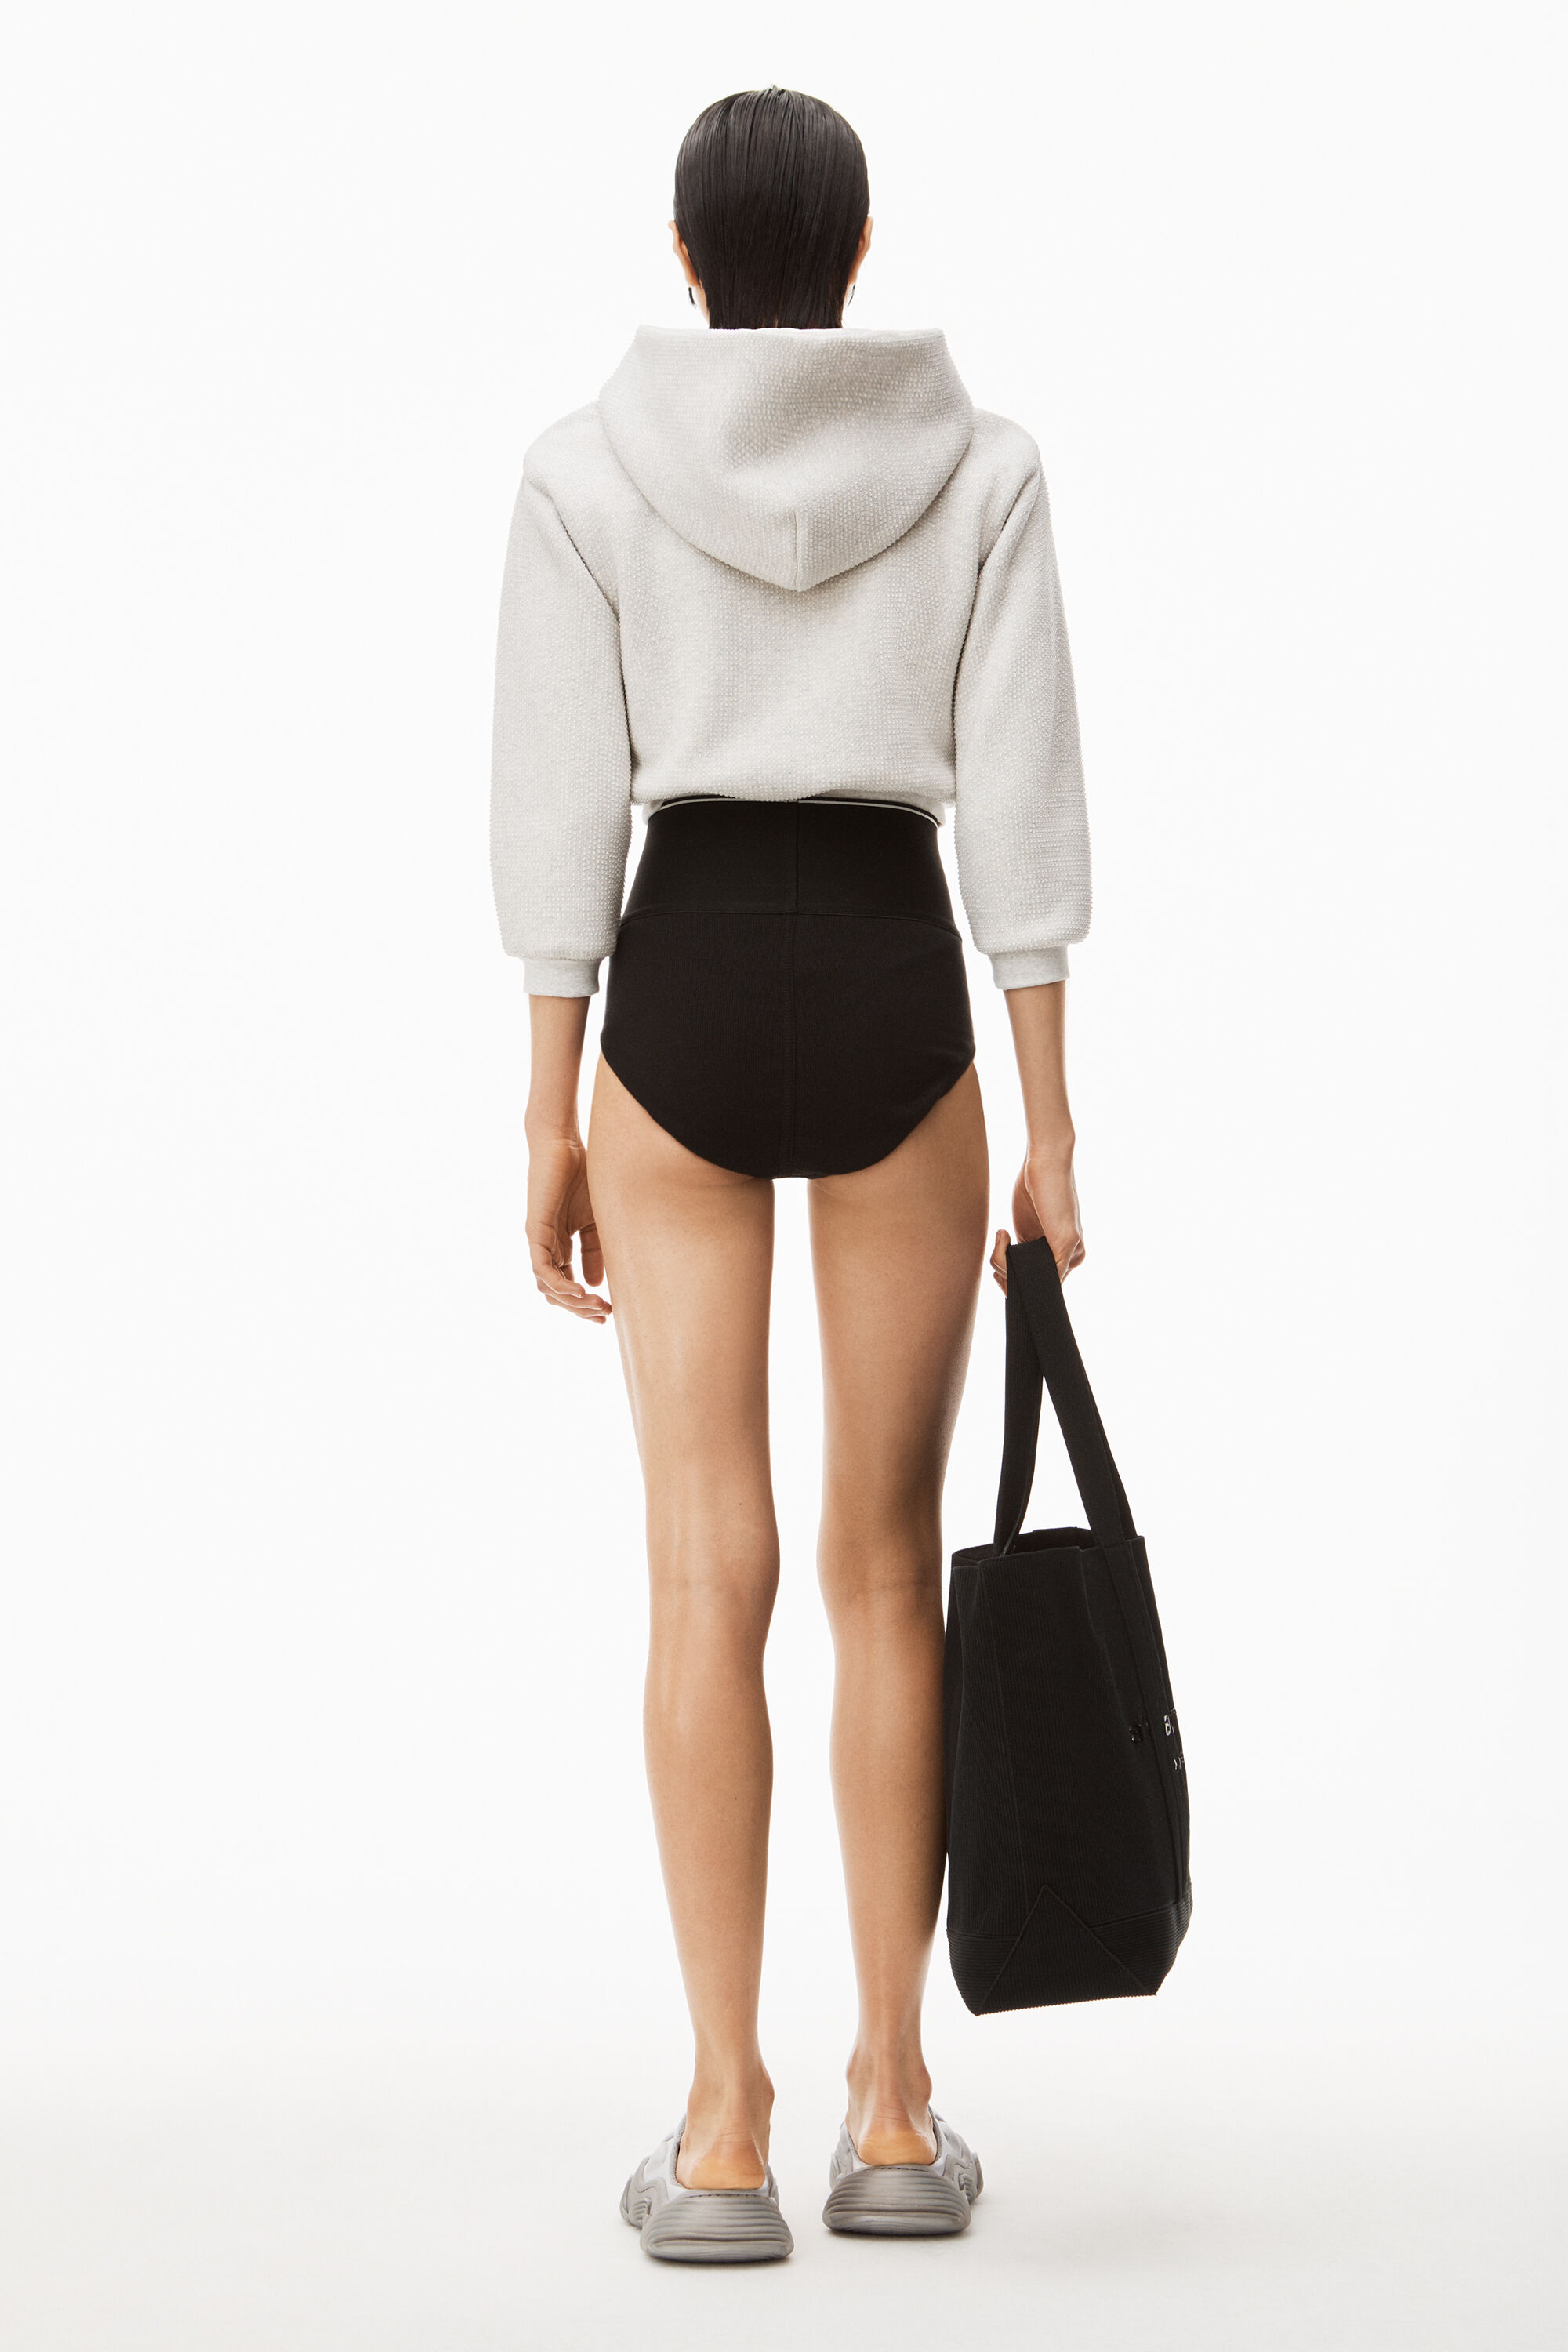 alexanderwang | Wang Graphics - clothing and accessories from